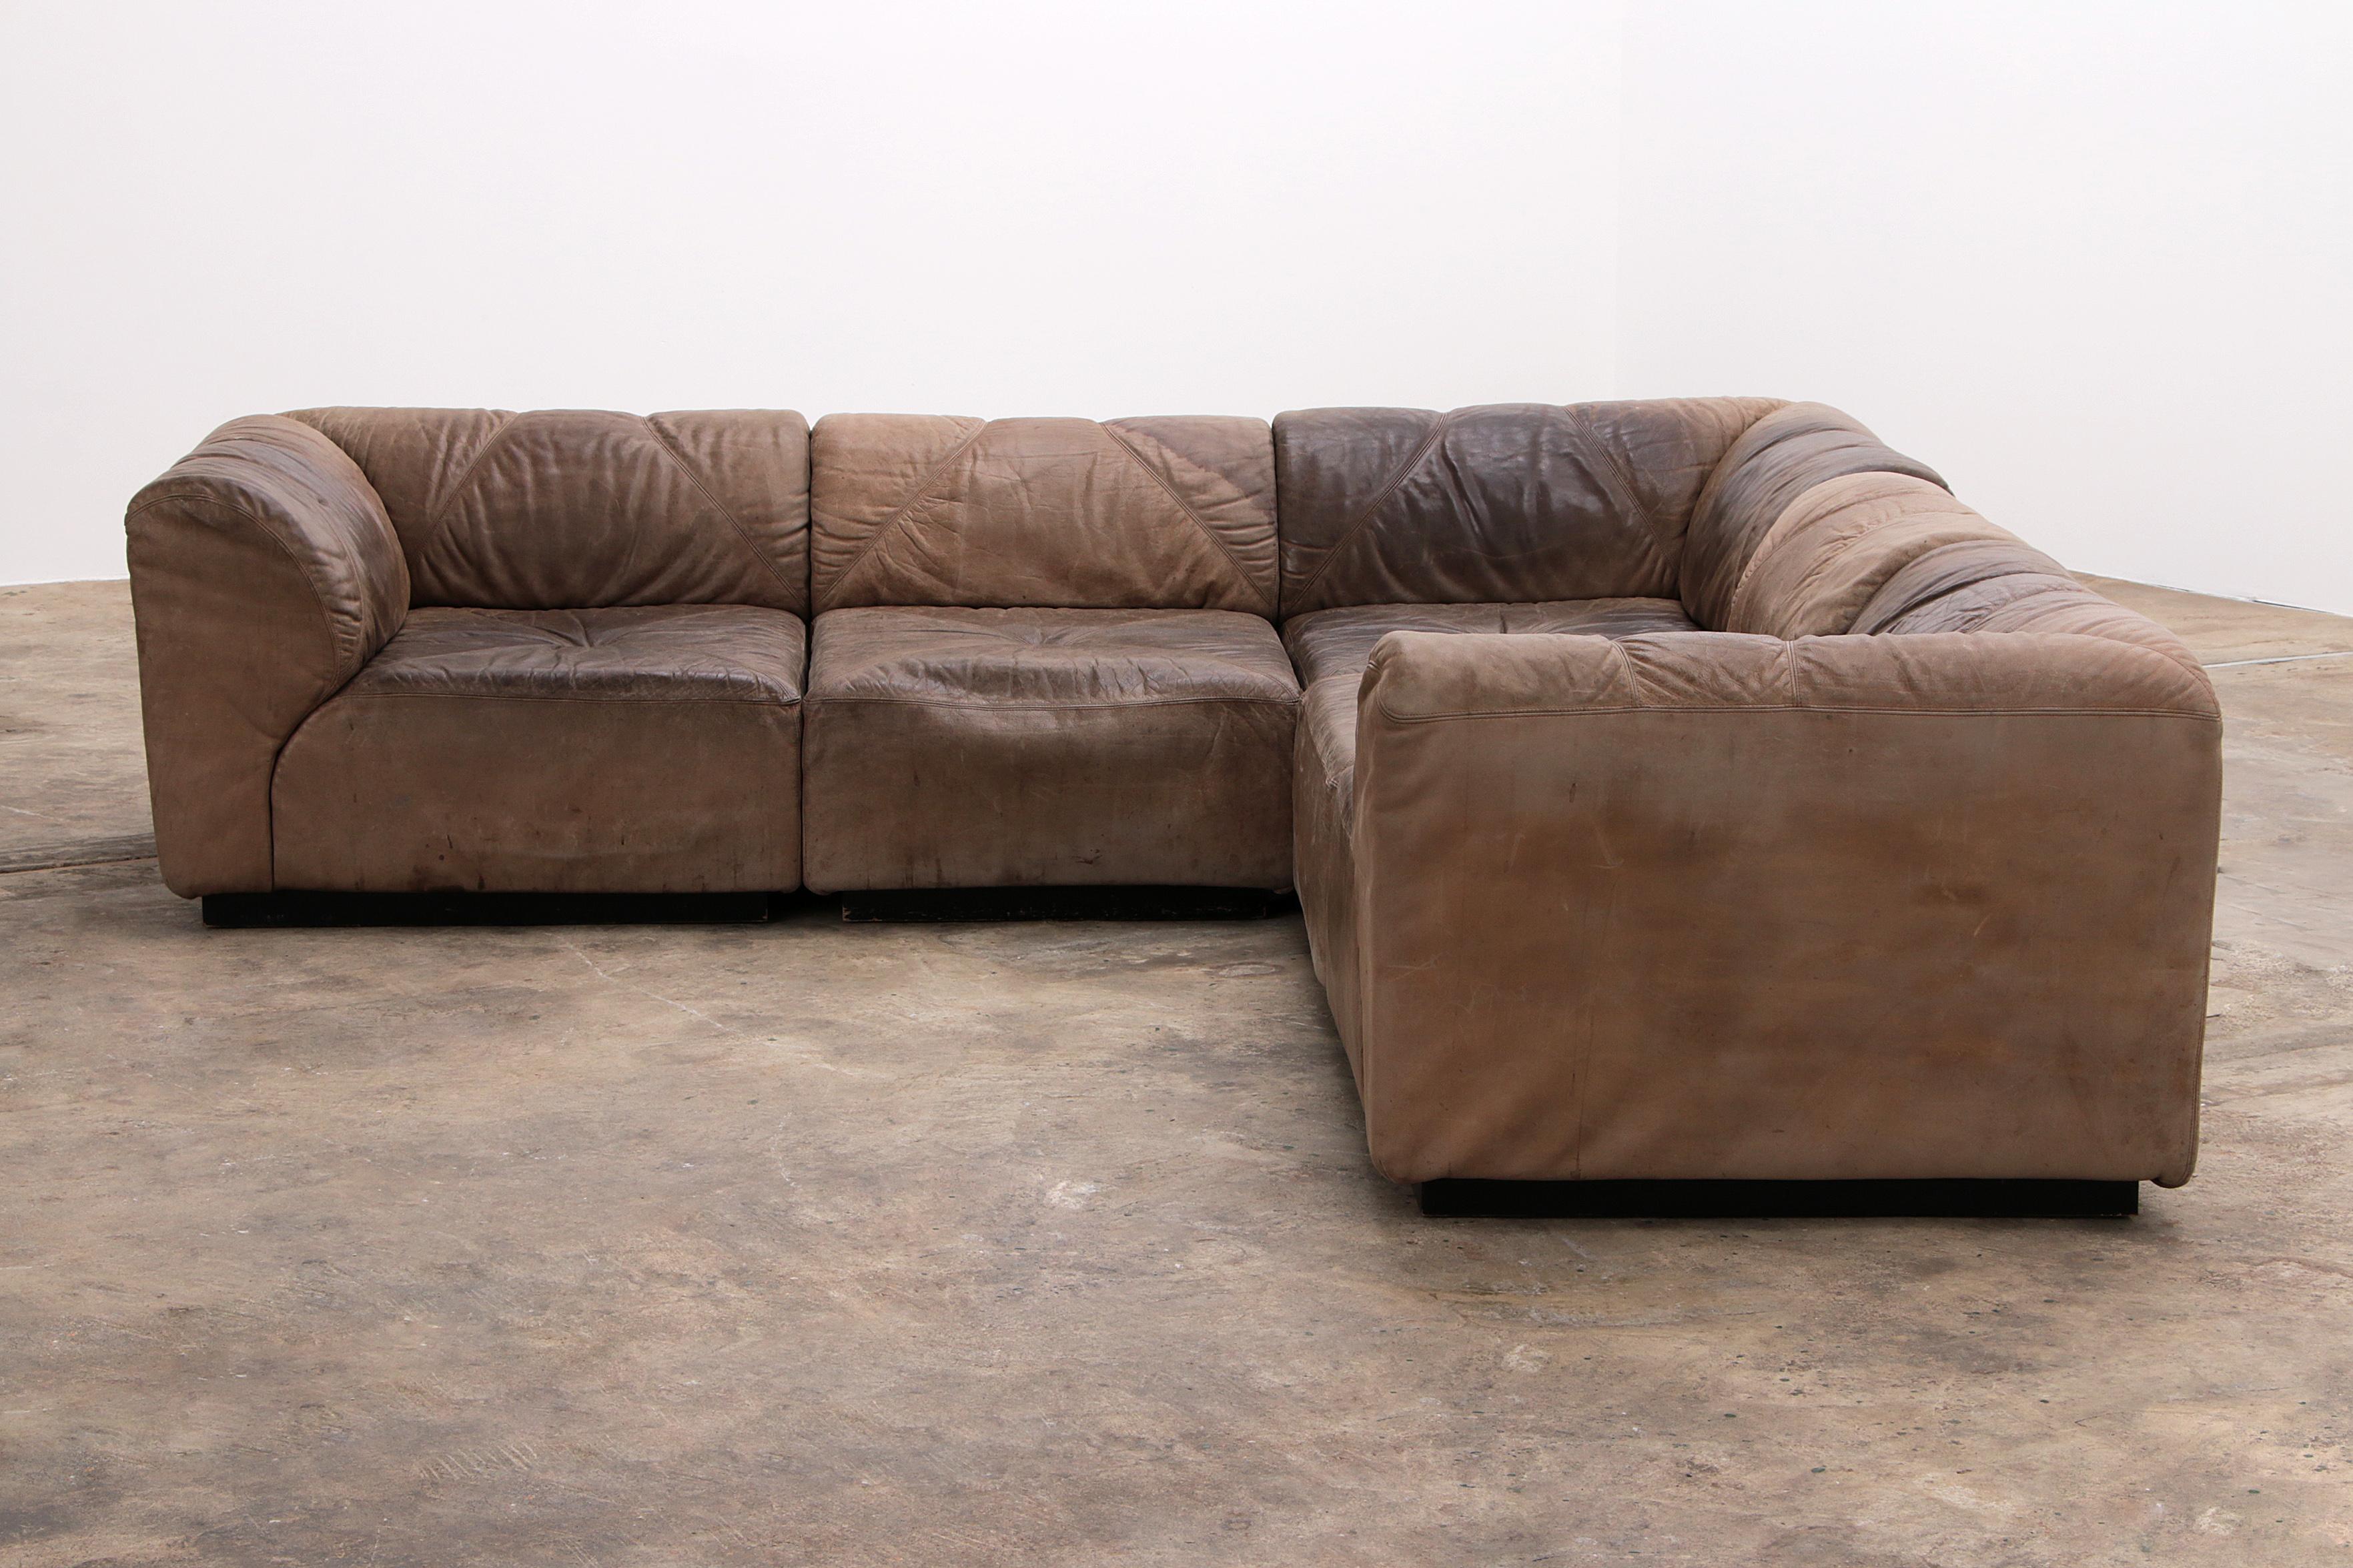 Modular Vintage Leather Sofa by Bernd Münzebrock for Walter Knoll In Fair Condition For Sale In Oostrum-Venray, NL